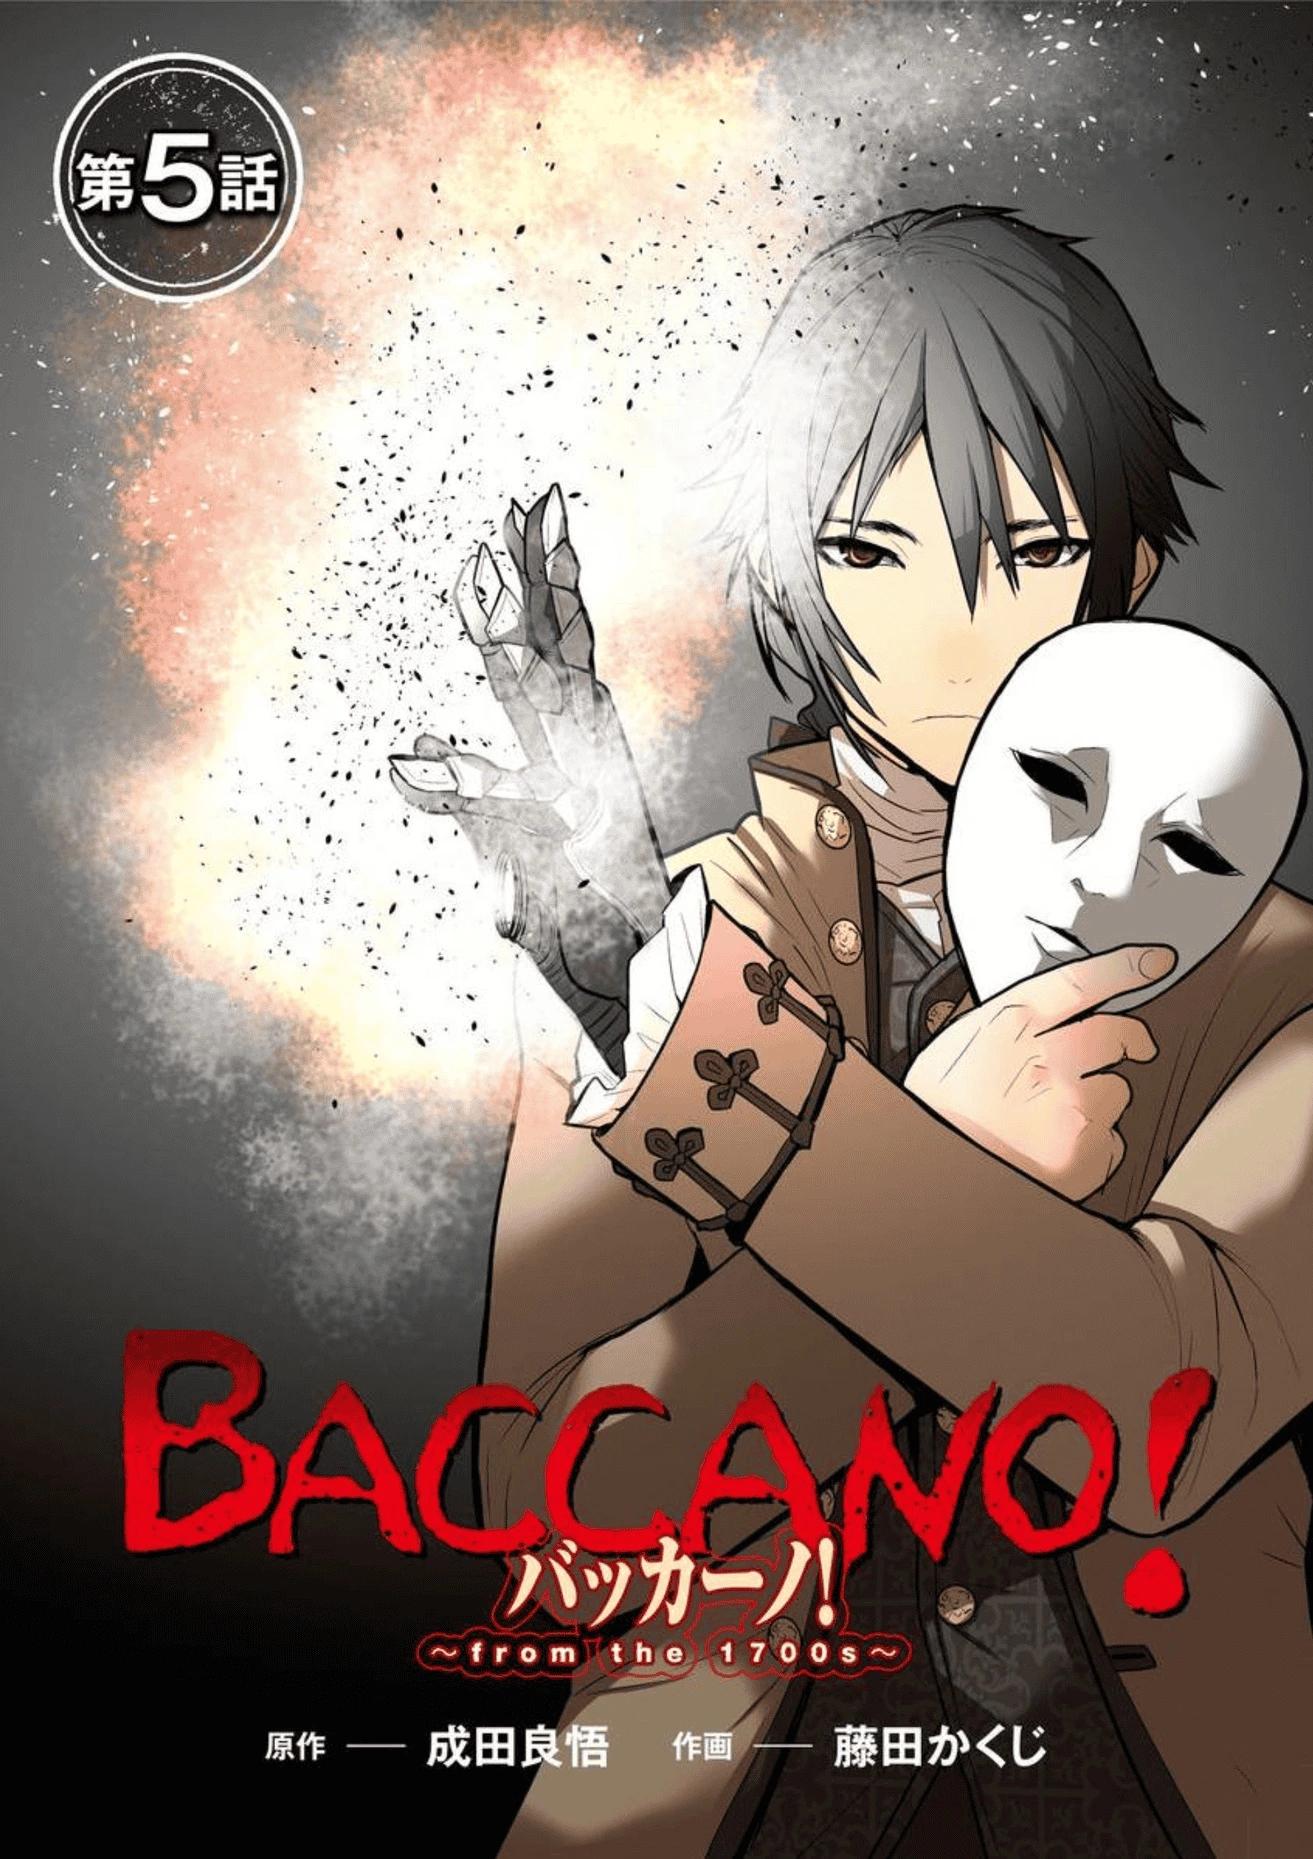 BACCANO! 永生之酒！~from the 1700s~ - 第05話 - 1